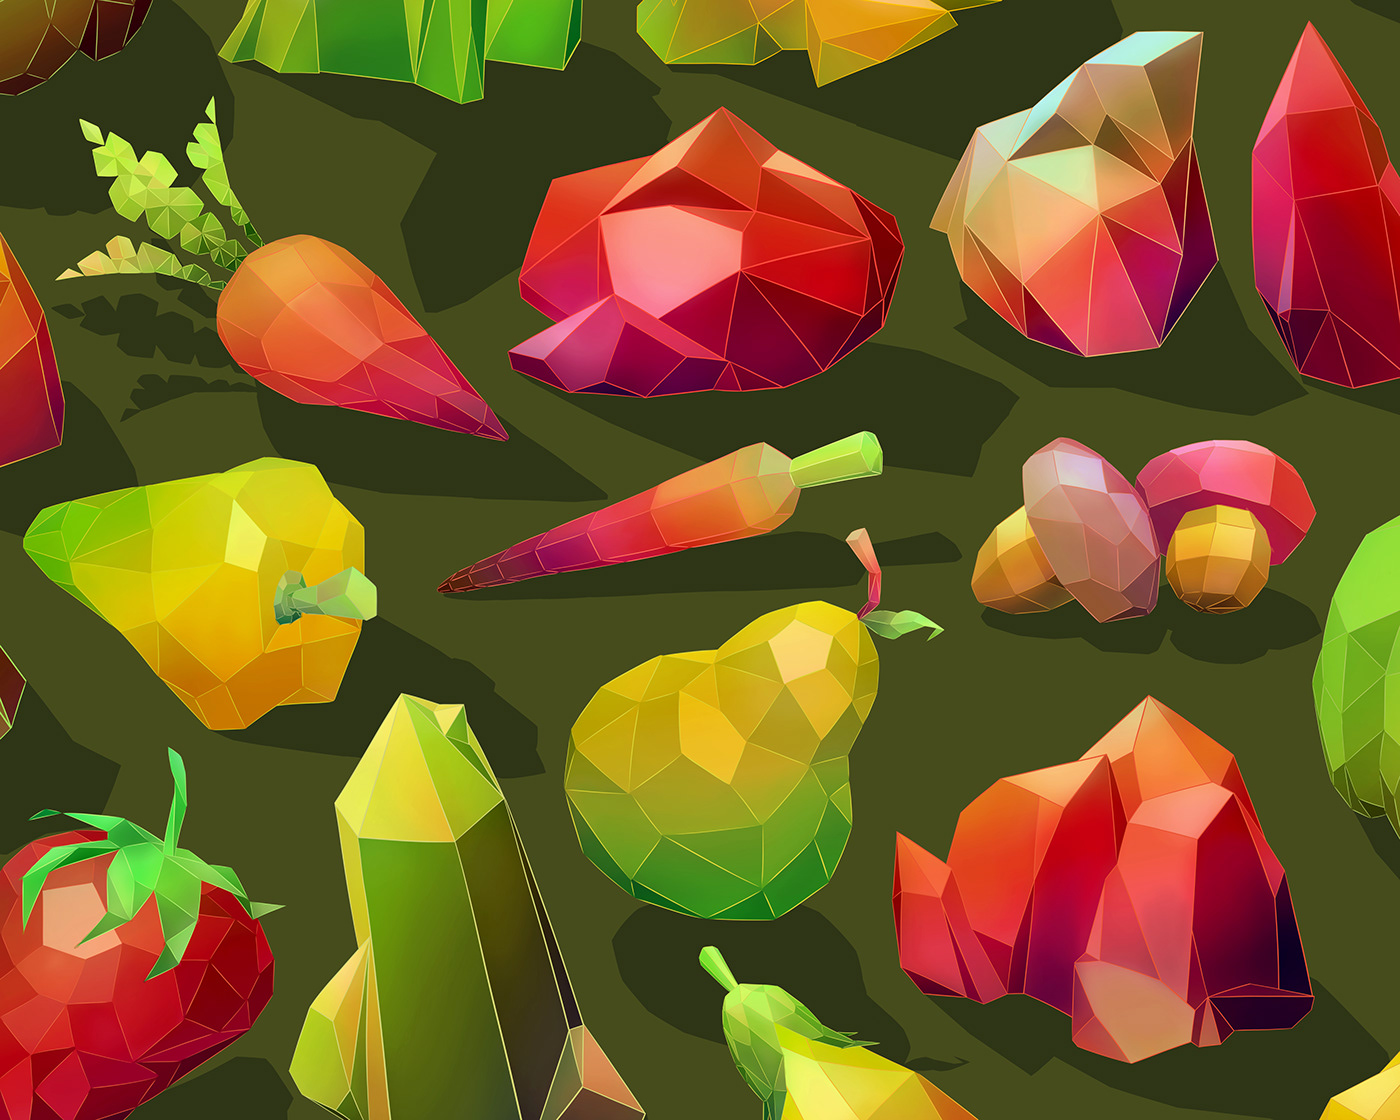 Digital art depicting low-poly 3D crystal fruits in fiery reds, oranges, yellows and greens.